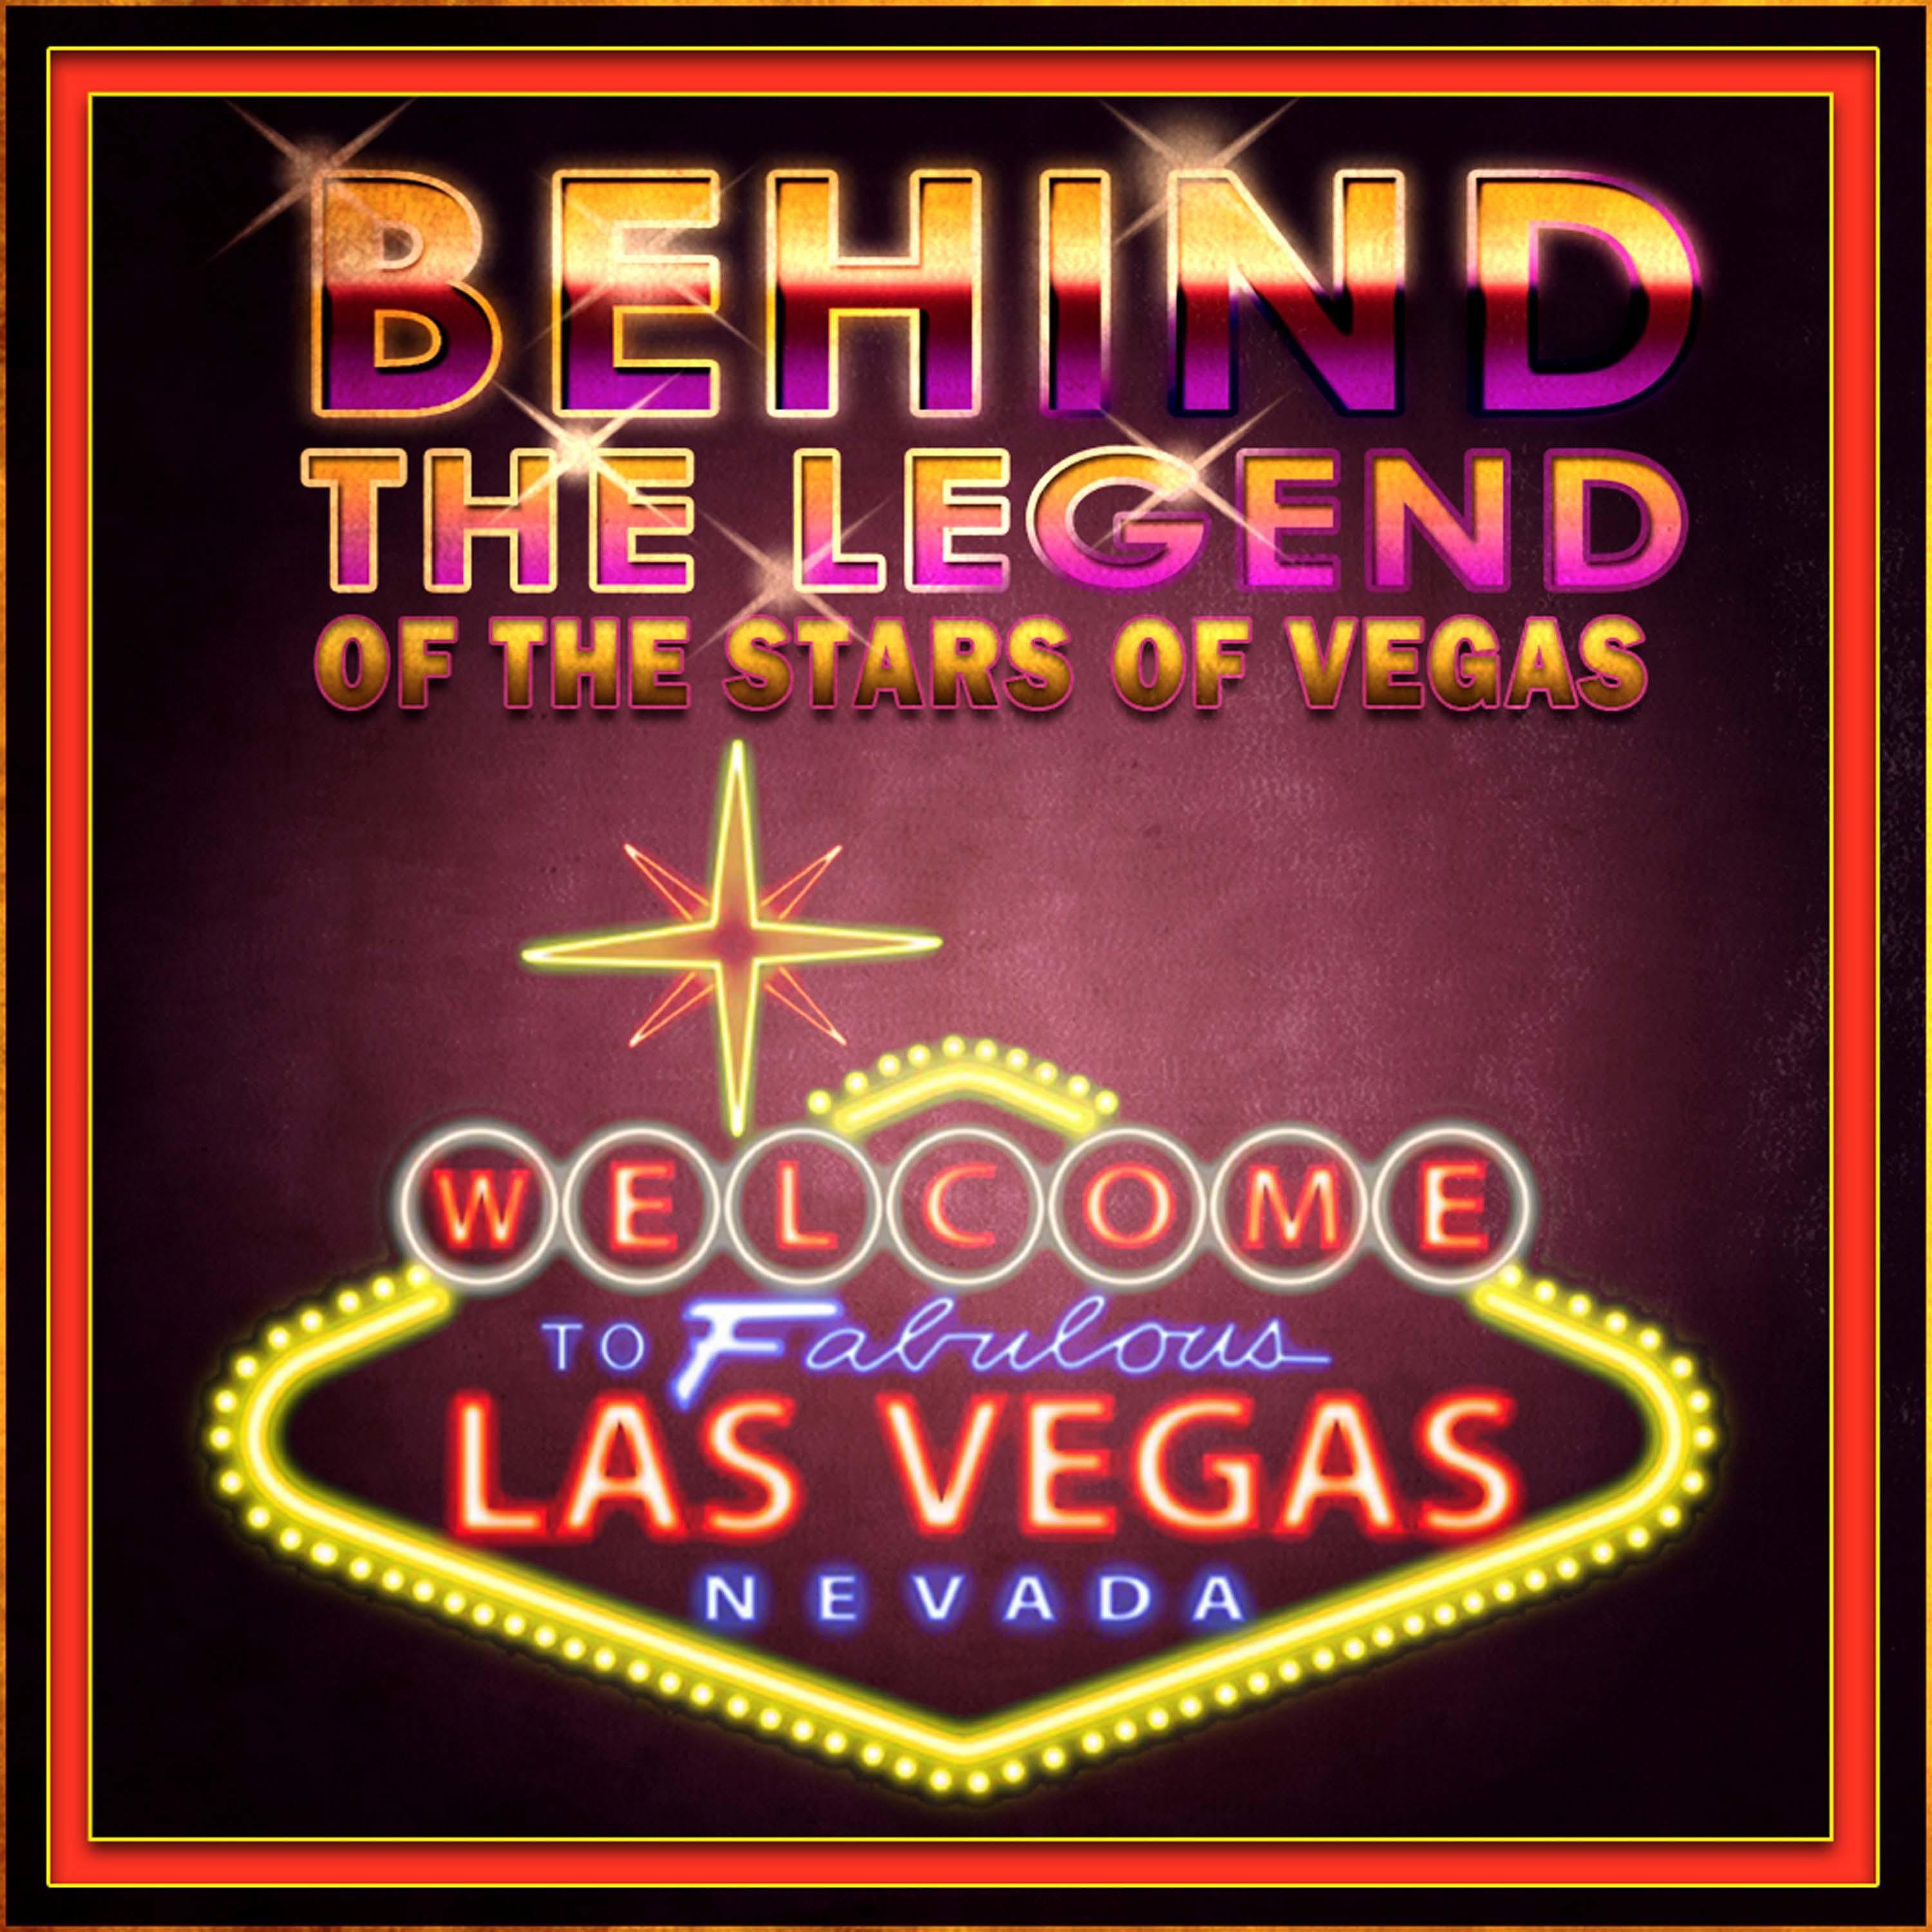 Behind The Legend Of The Stars Of Las Vegas